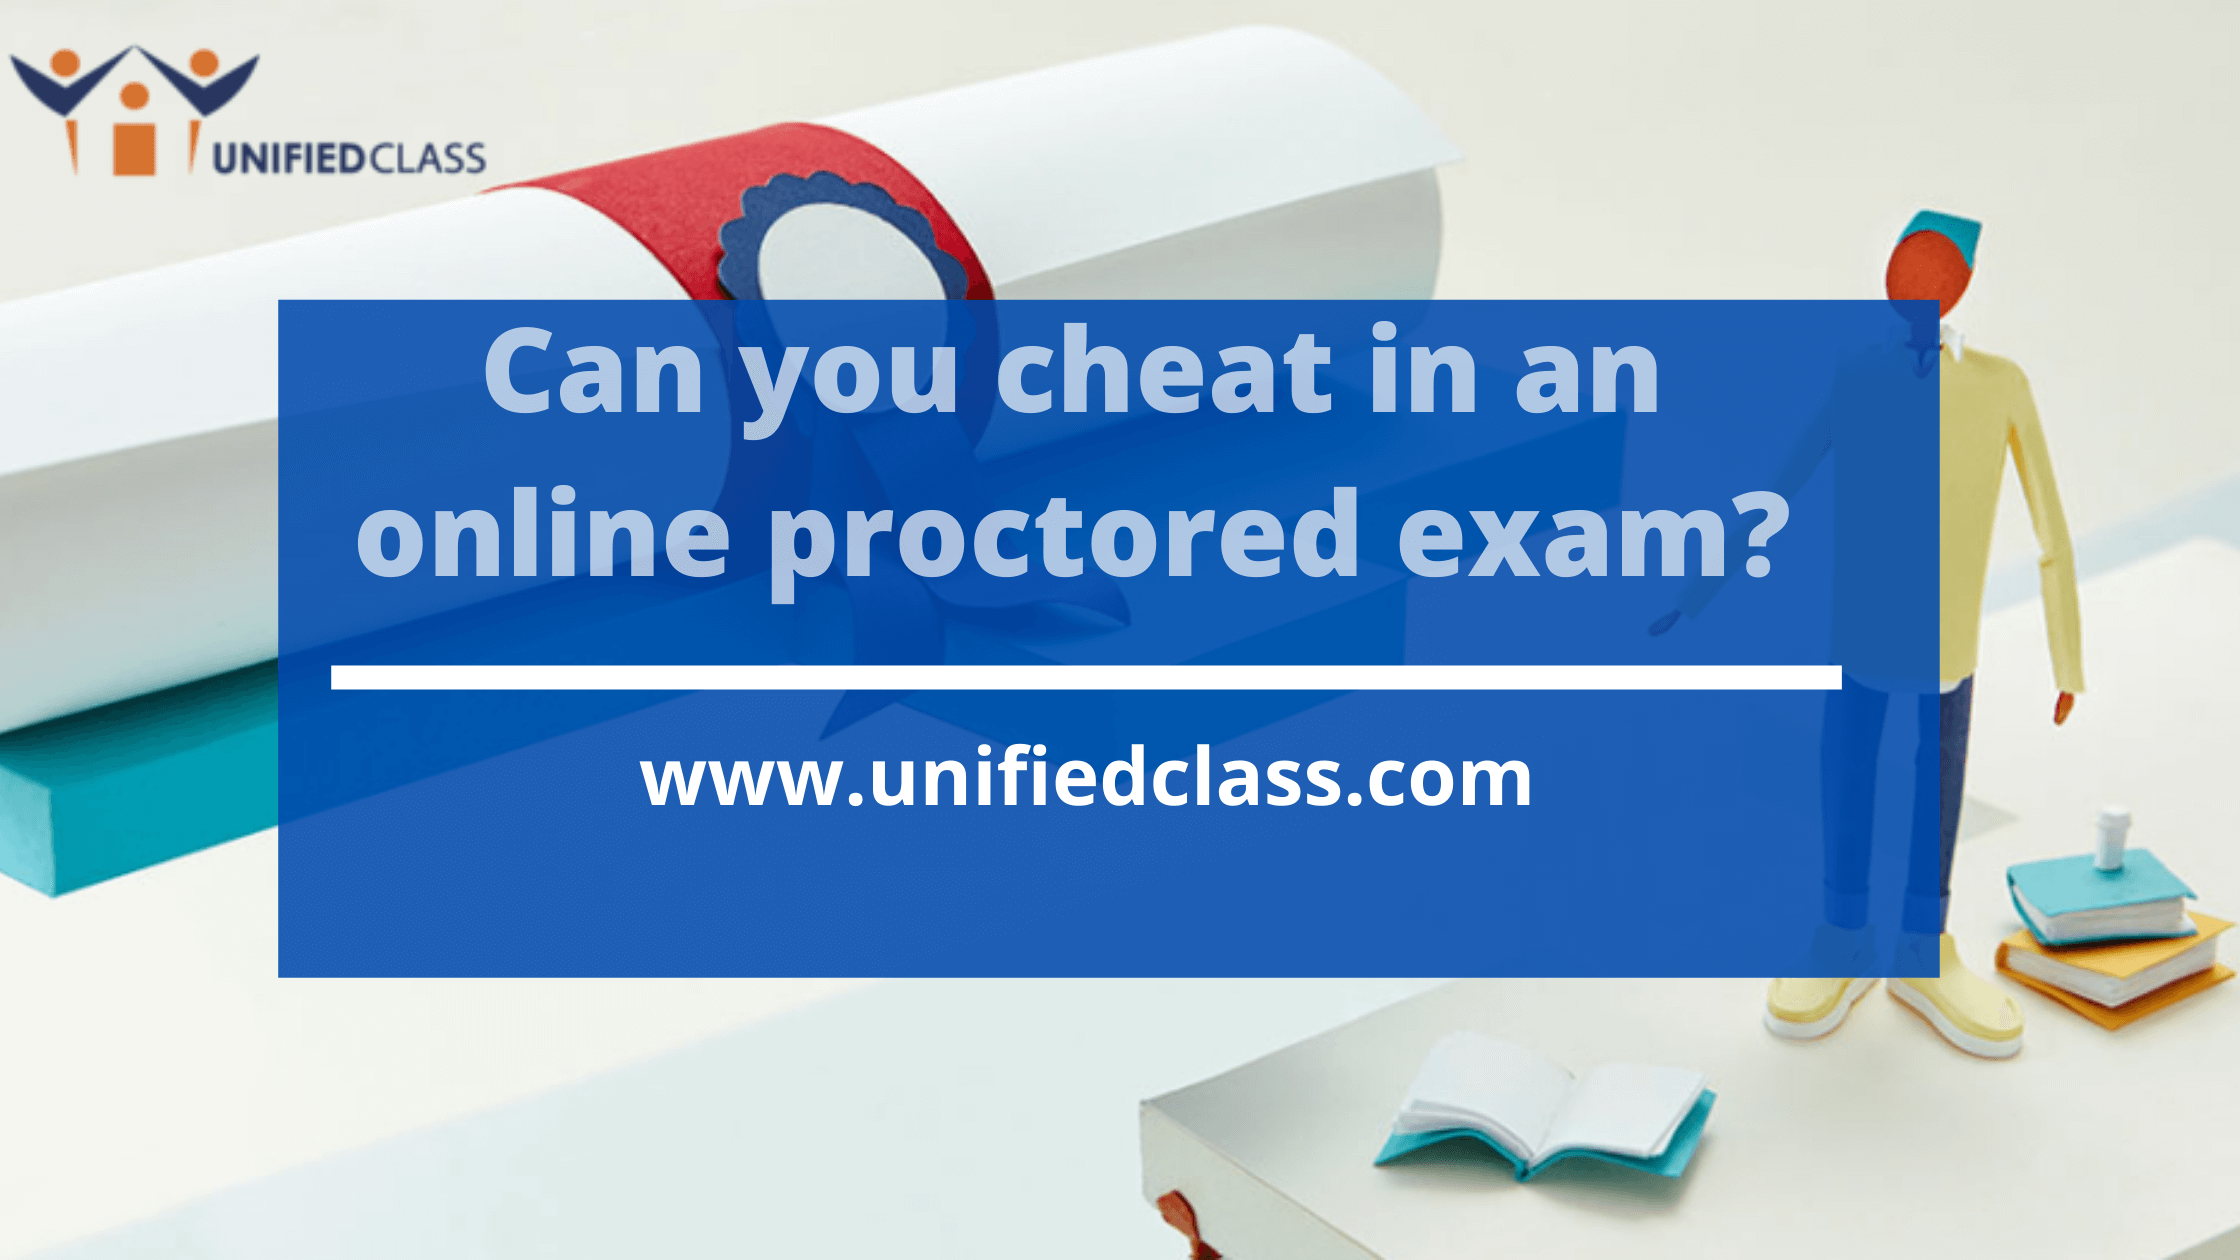 Can you cheat in an online proctored exam?